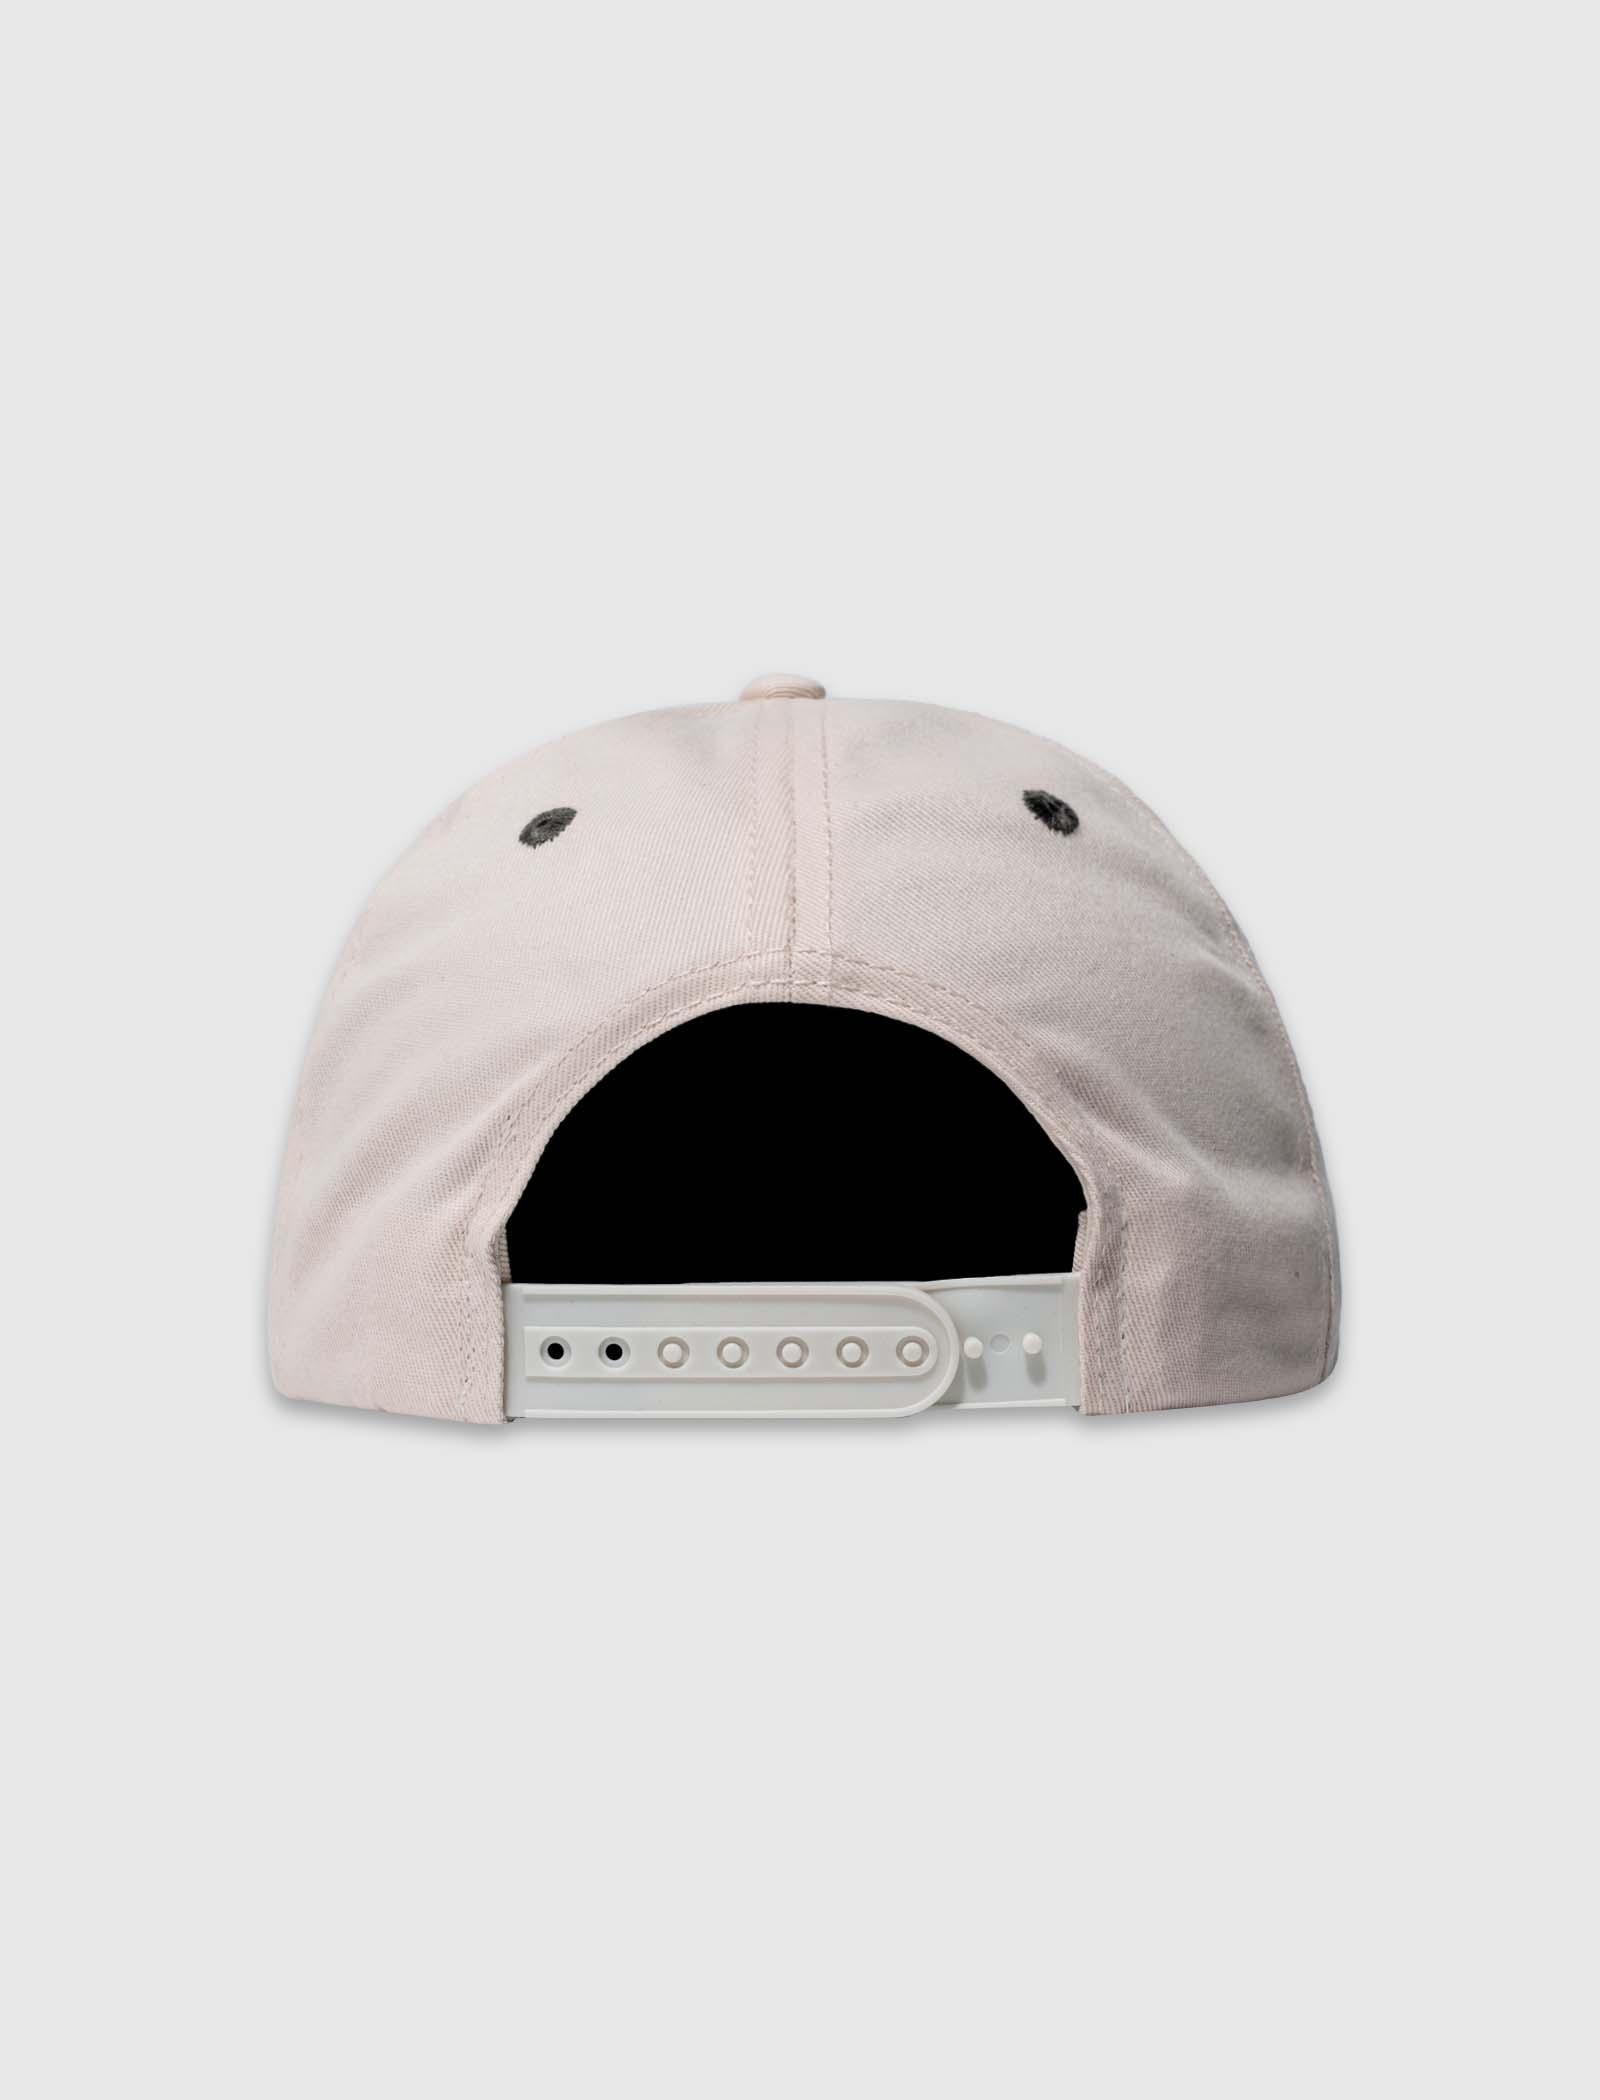 AFTERLIFE 6 PANEL CAP - 5